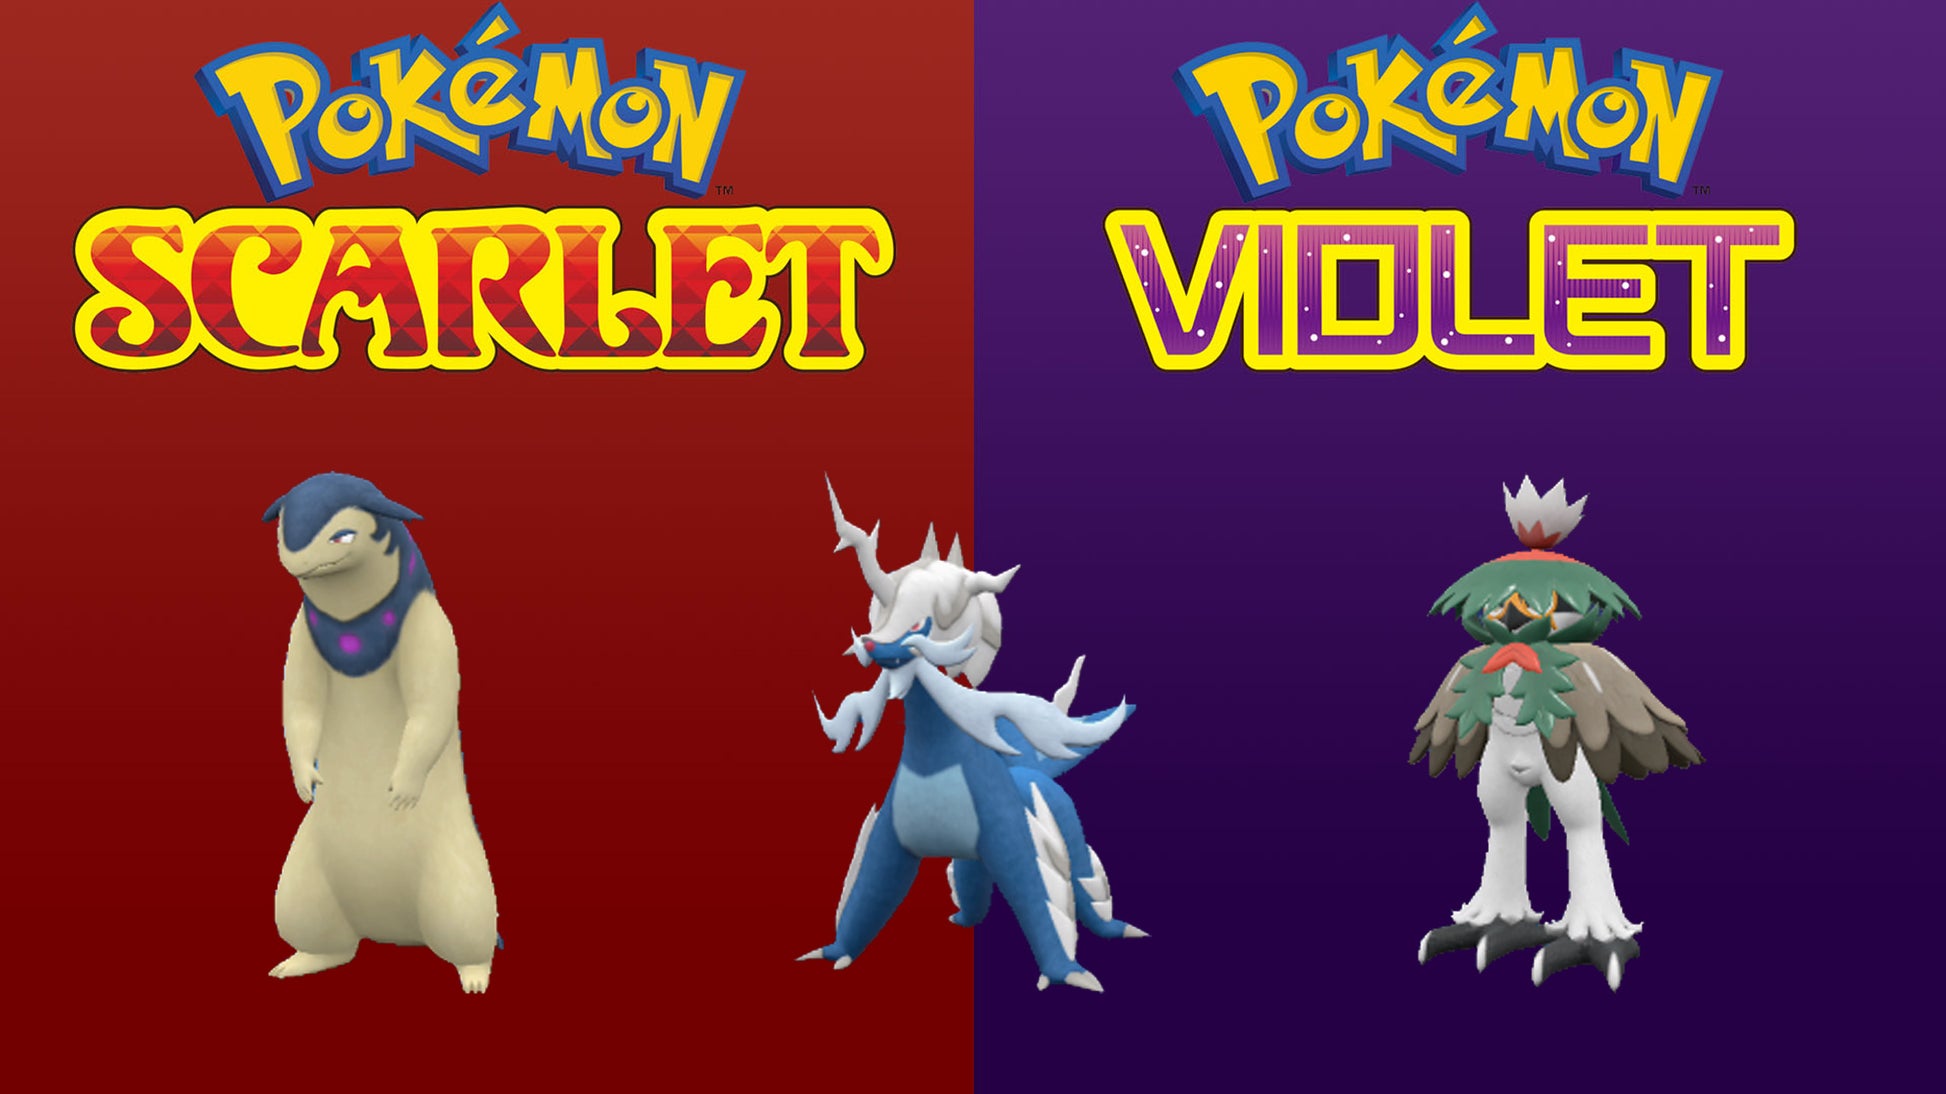 How to EV Train Your Pokemon in Scarlet and Violet